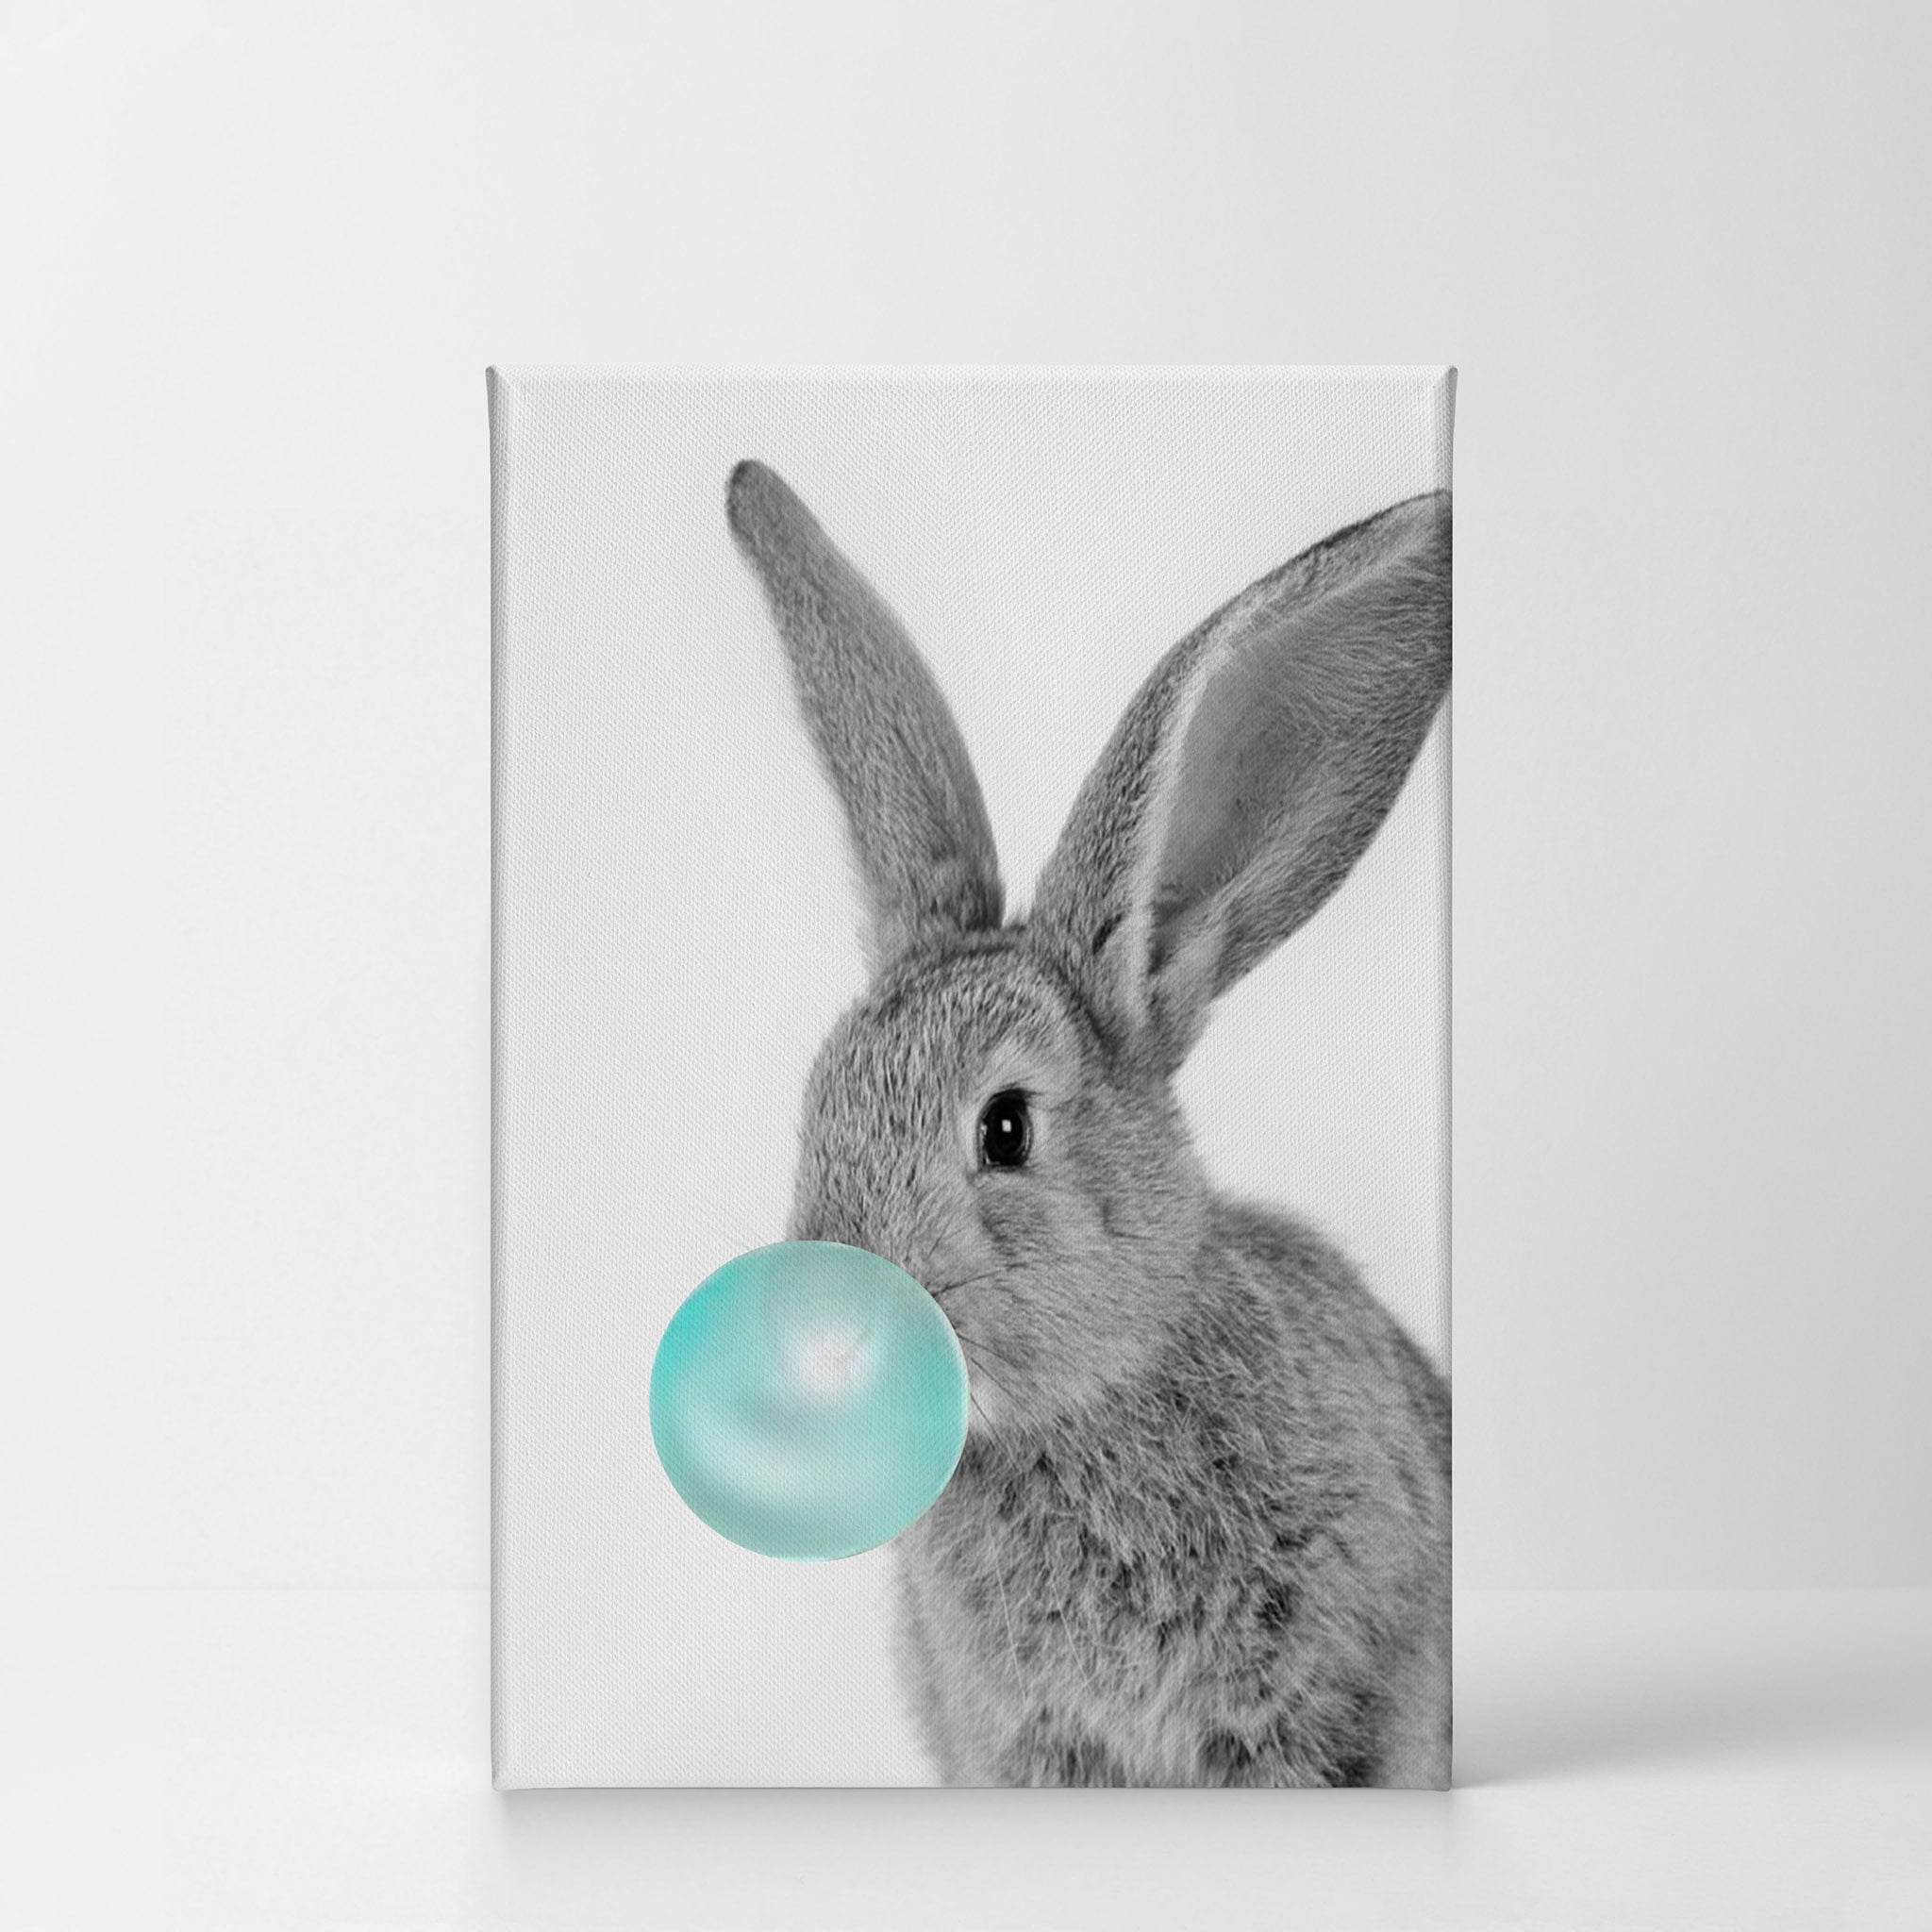 Smile Art Design Bunny Rabbit Animal Bubble Gum Art Teal Blue CANVAS PRINT  Black and White Wall Art Home Decoration Pop Art Living Room Kids Room Decor  Made in the USA 40x30